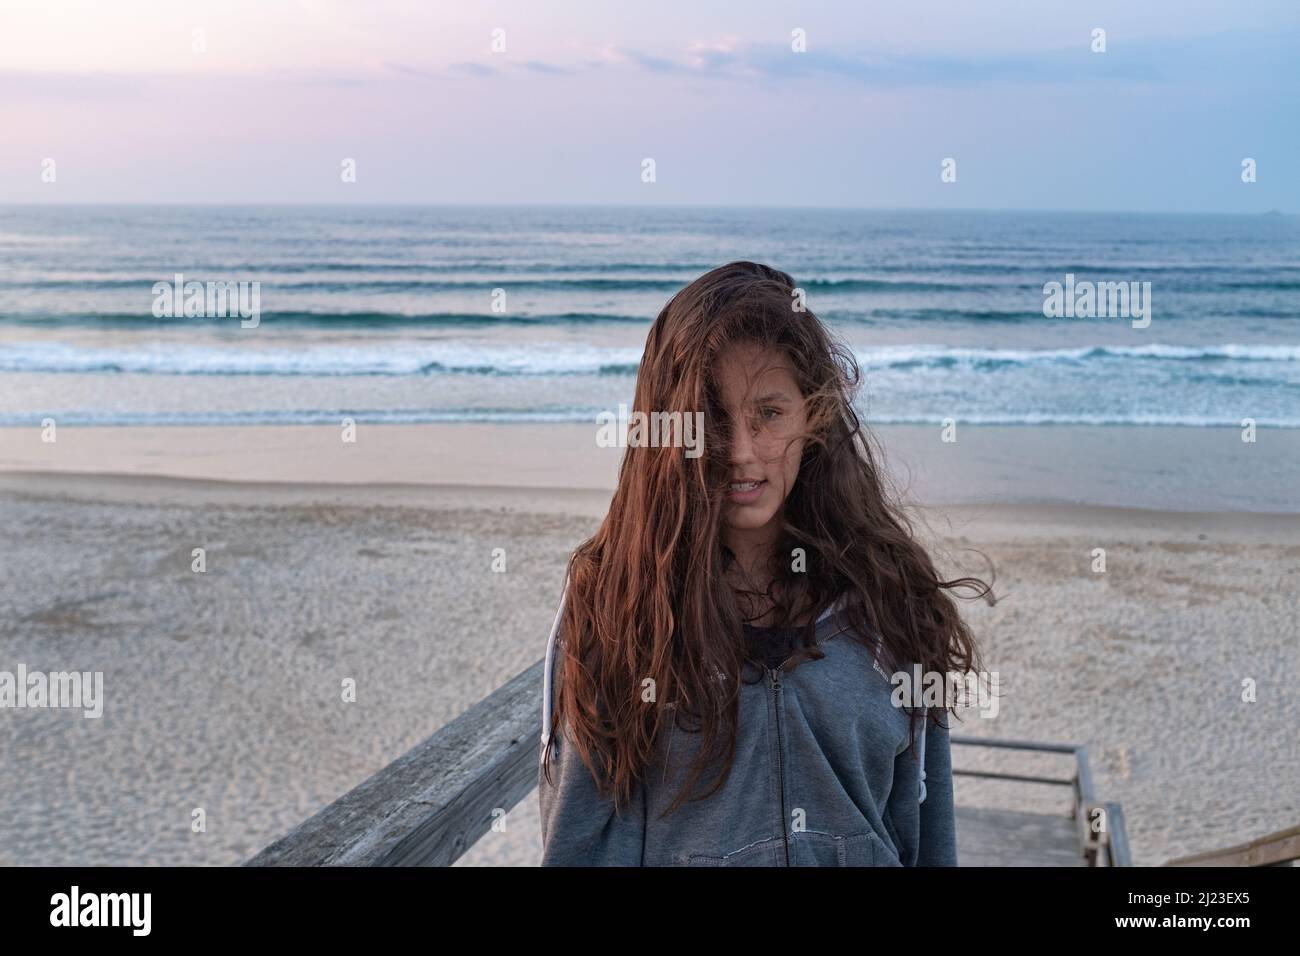 Young woman on the beach wind blows up her hair cover half face seascape Stock Photo